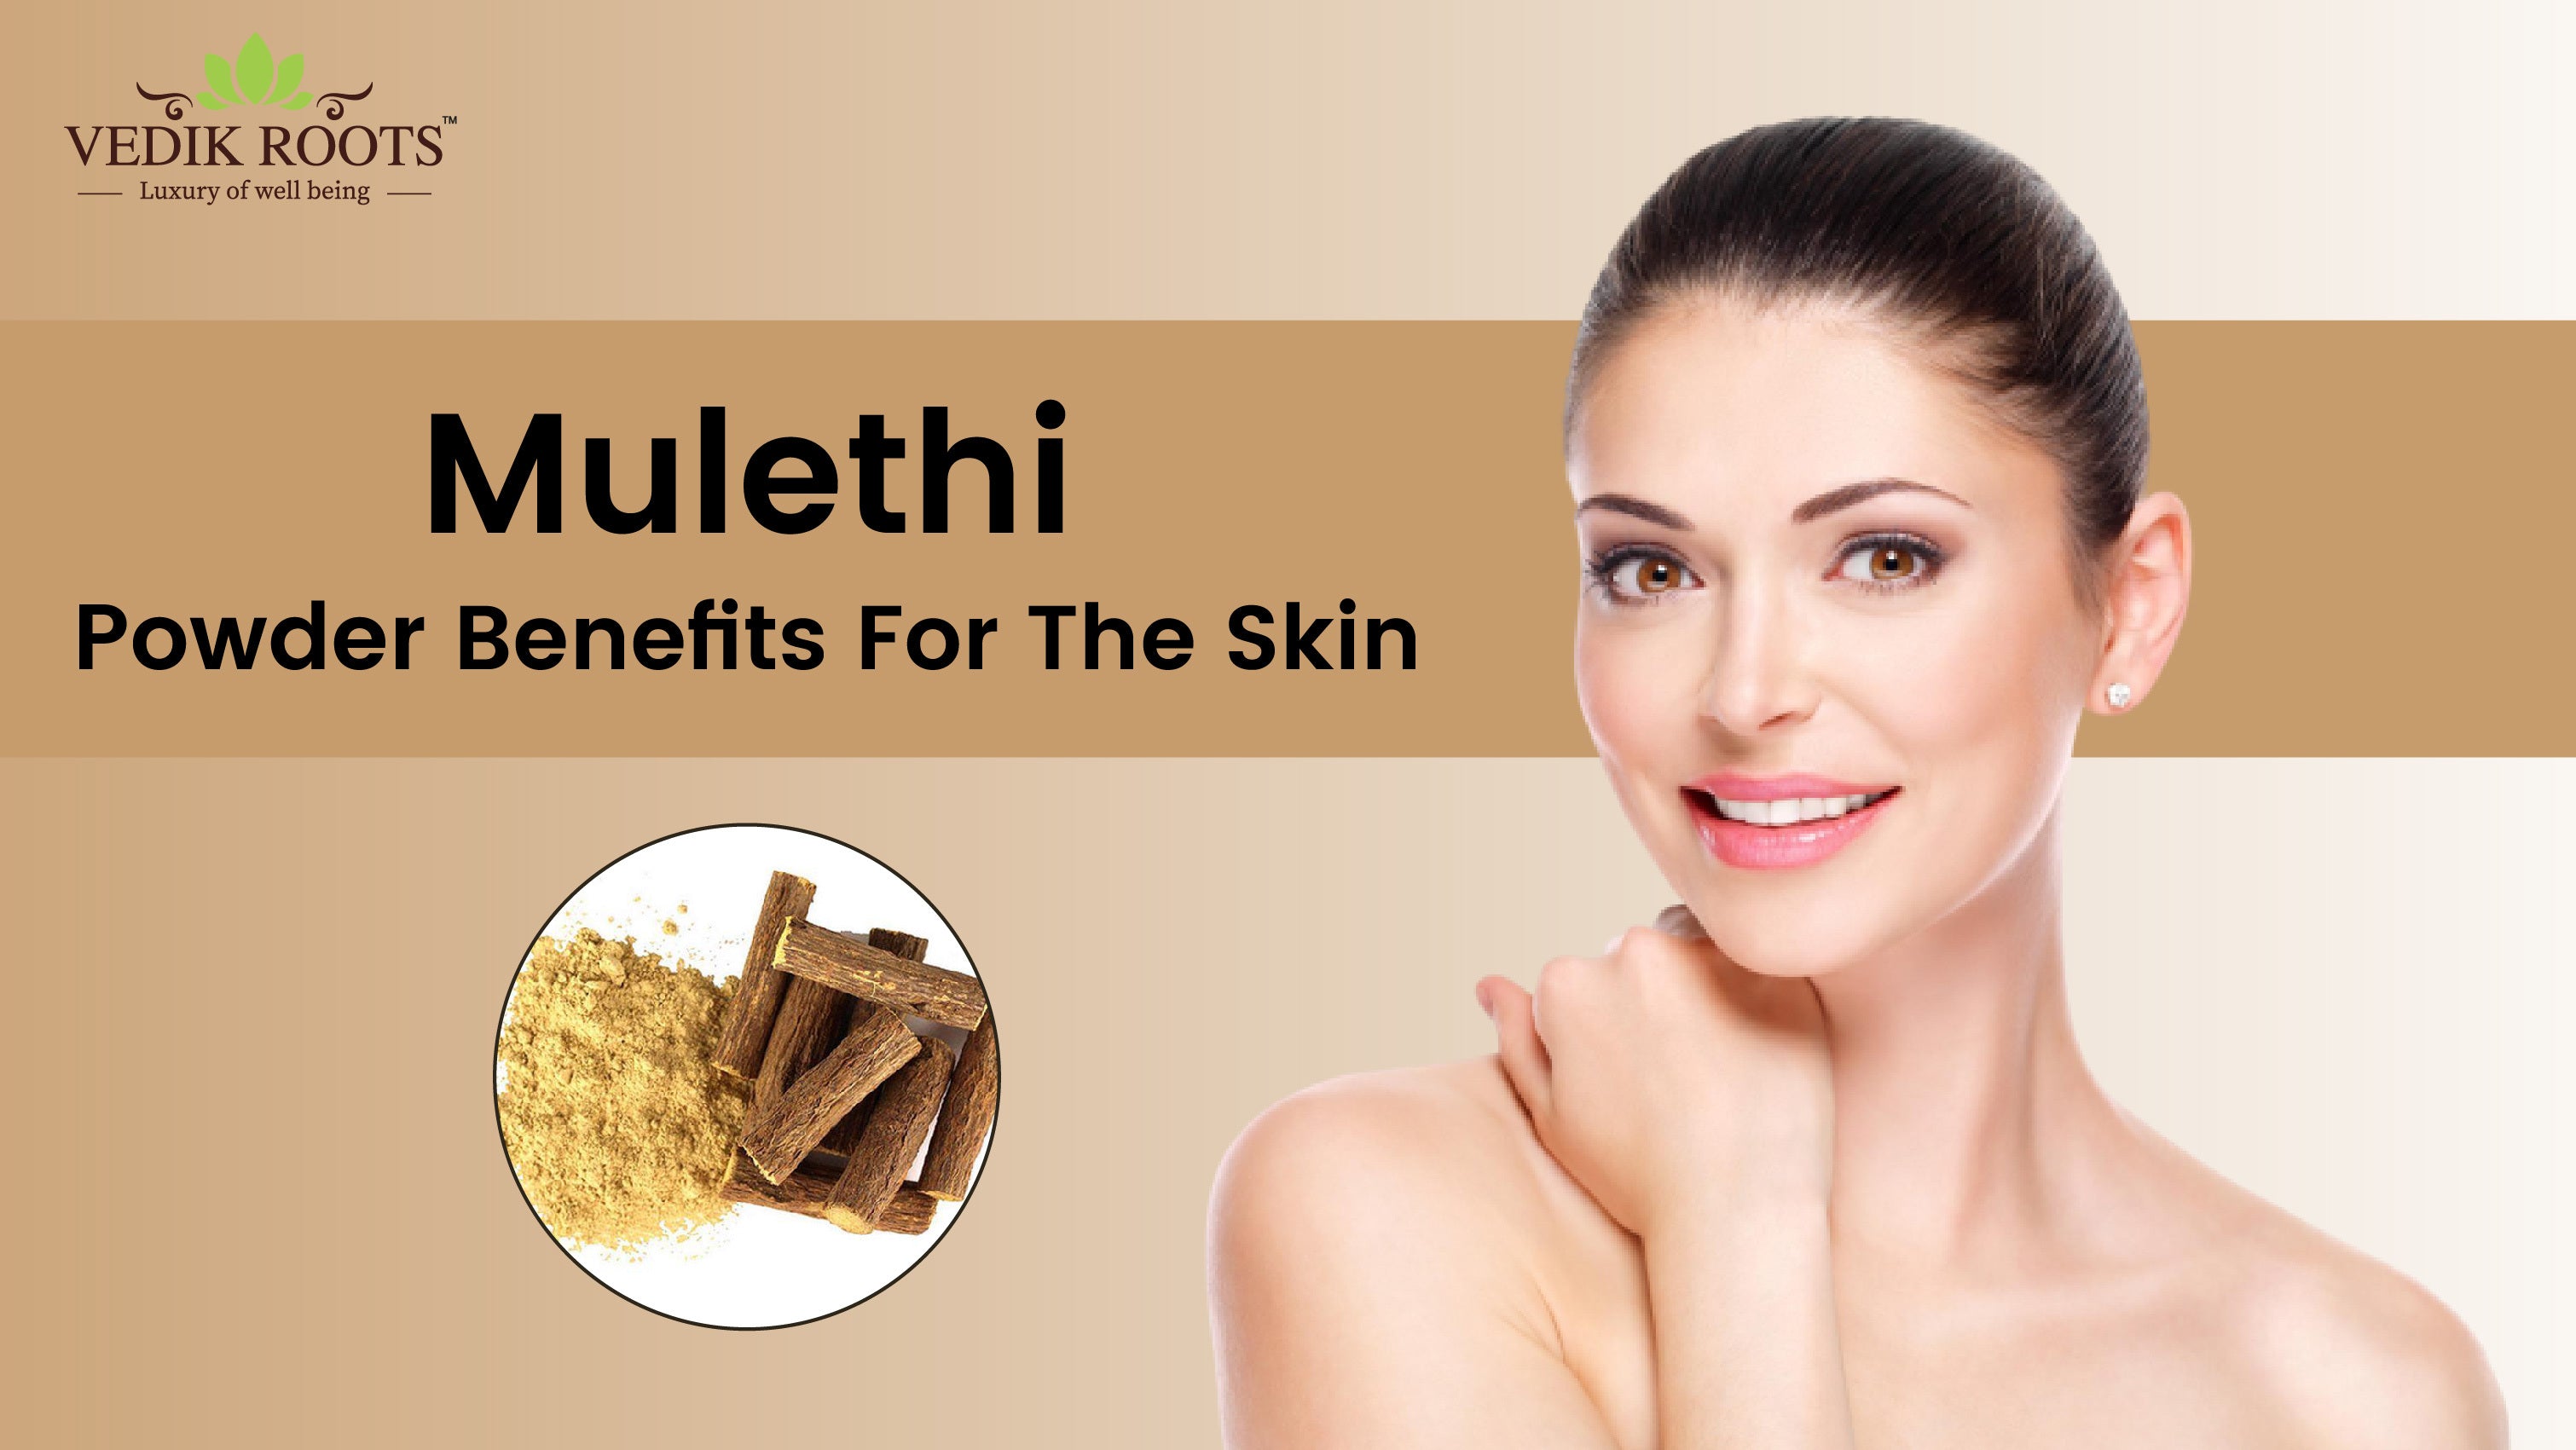 Mulethi Powder: How is it Beneficial For Skin?